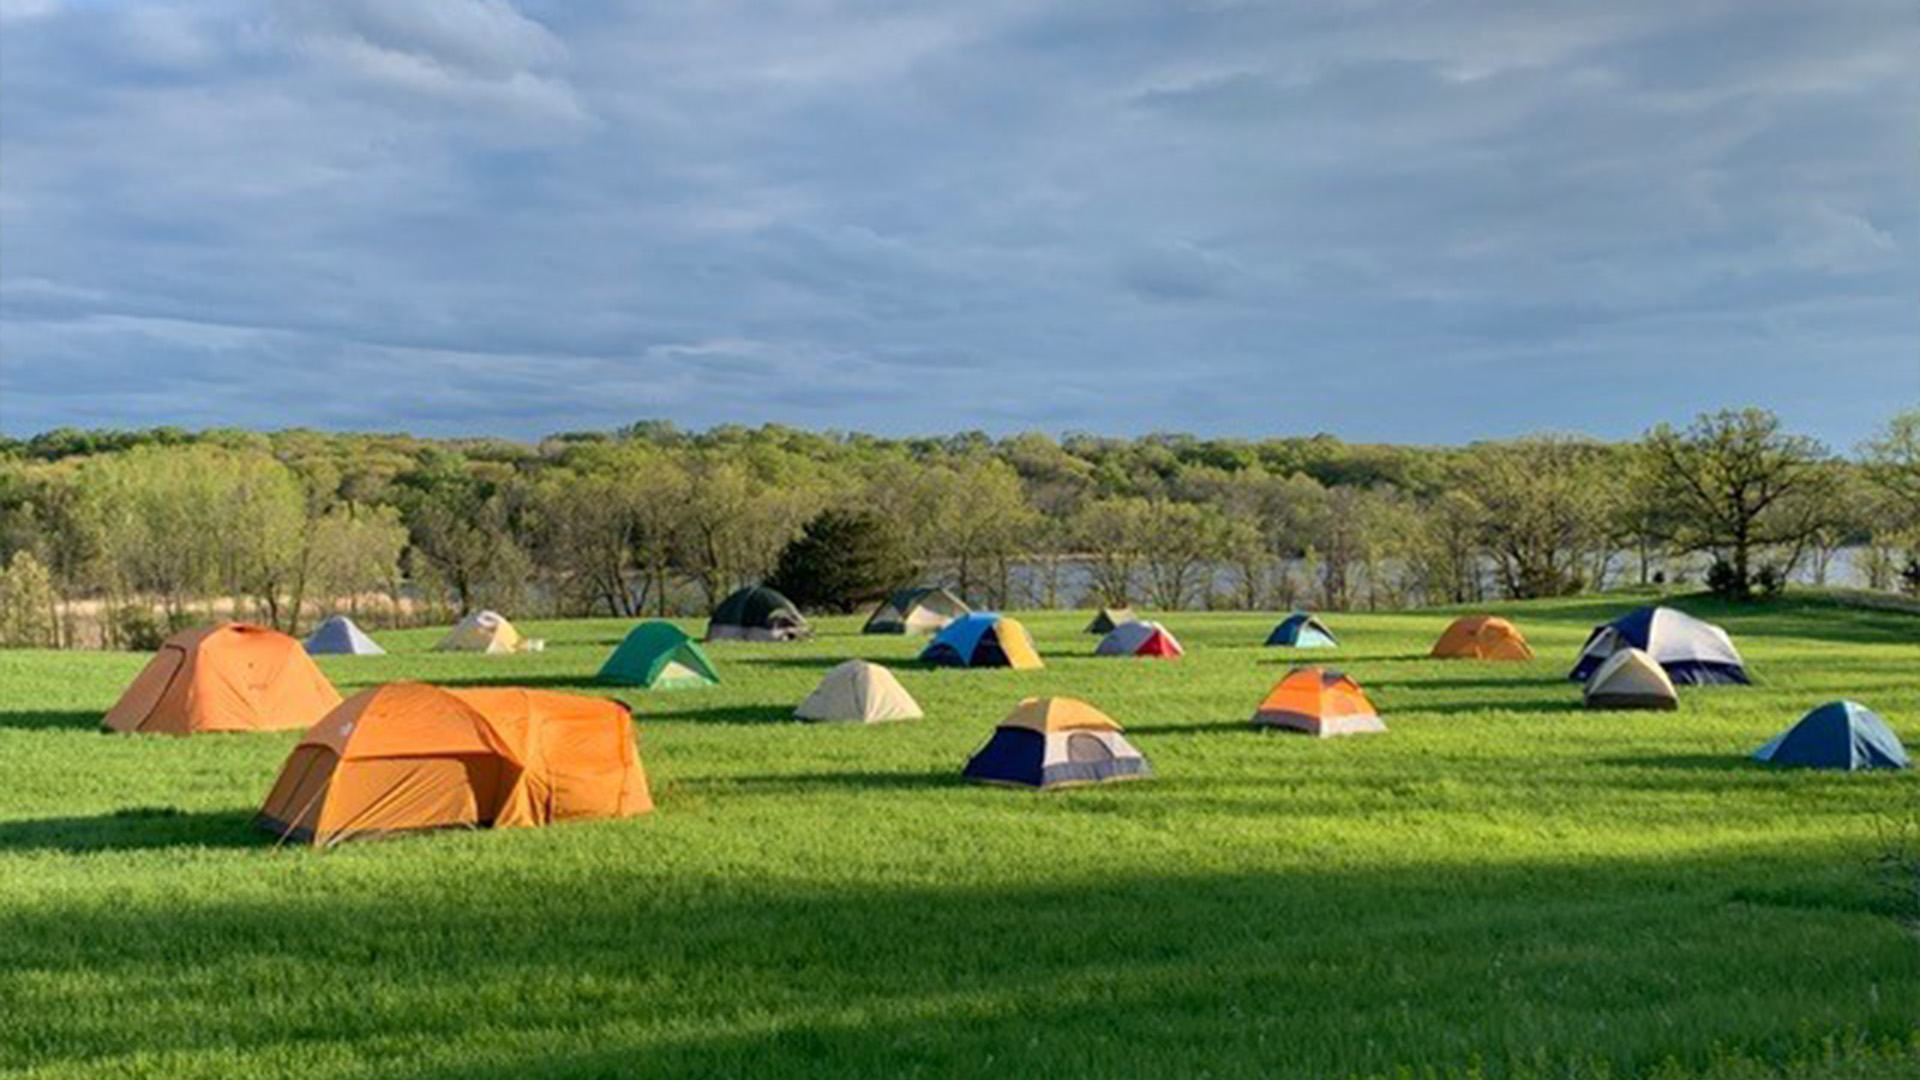 Twenty or so tents are set up in an open field near the lake